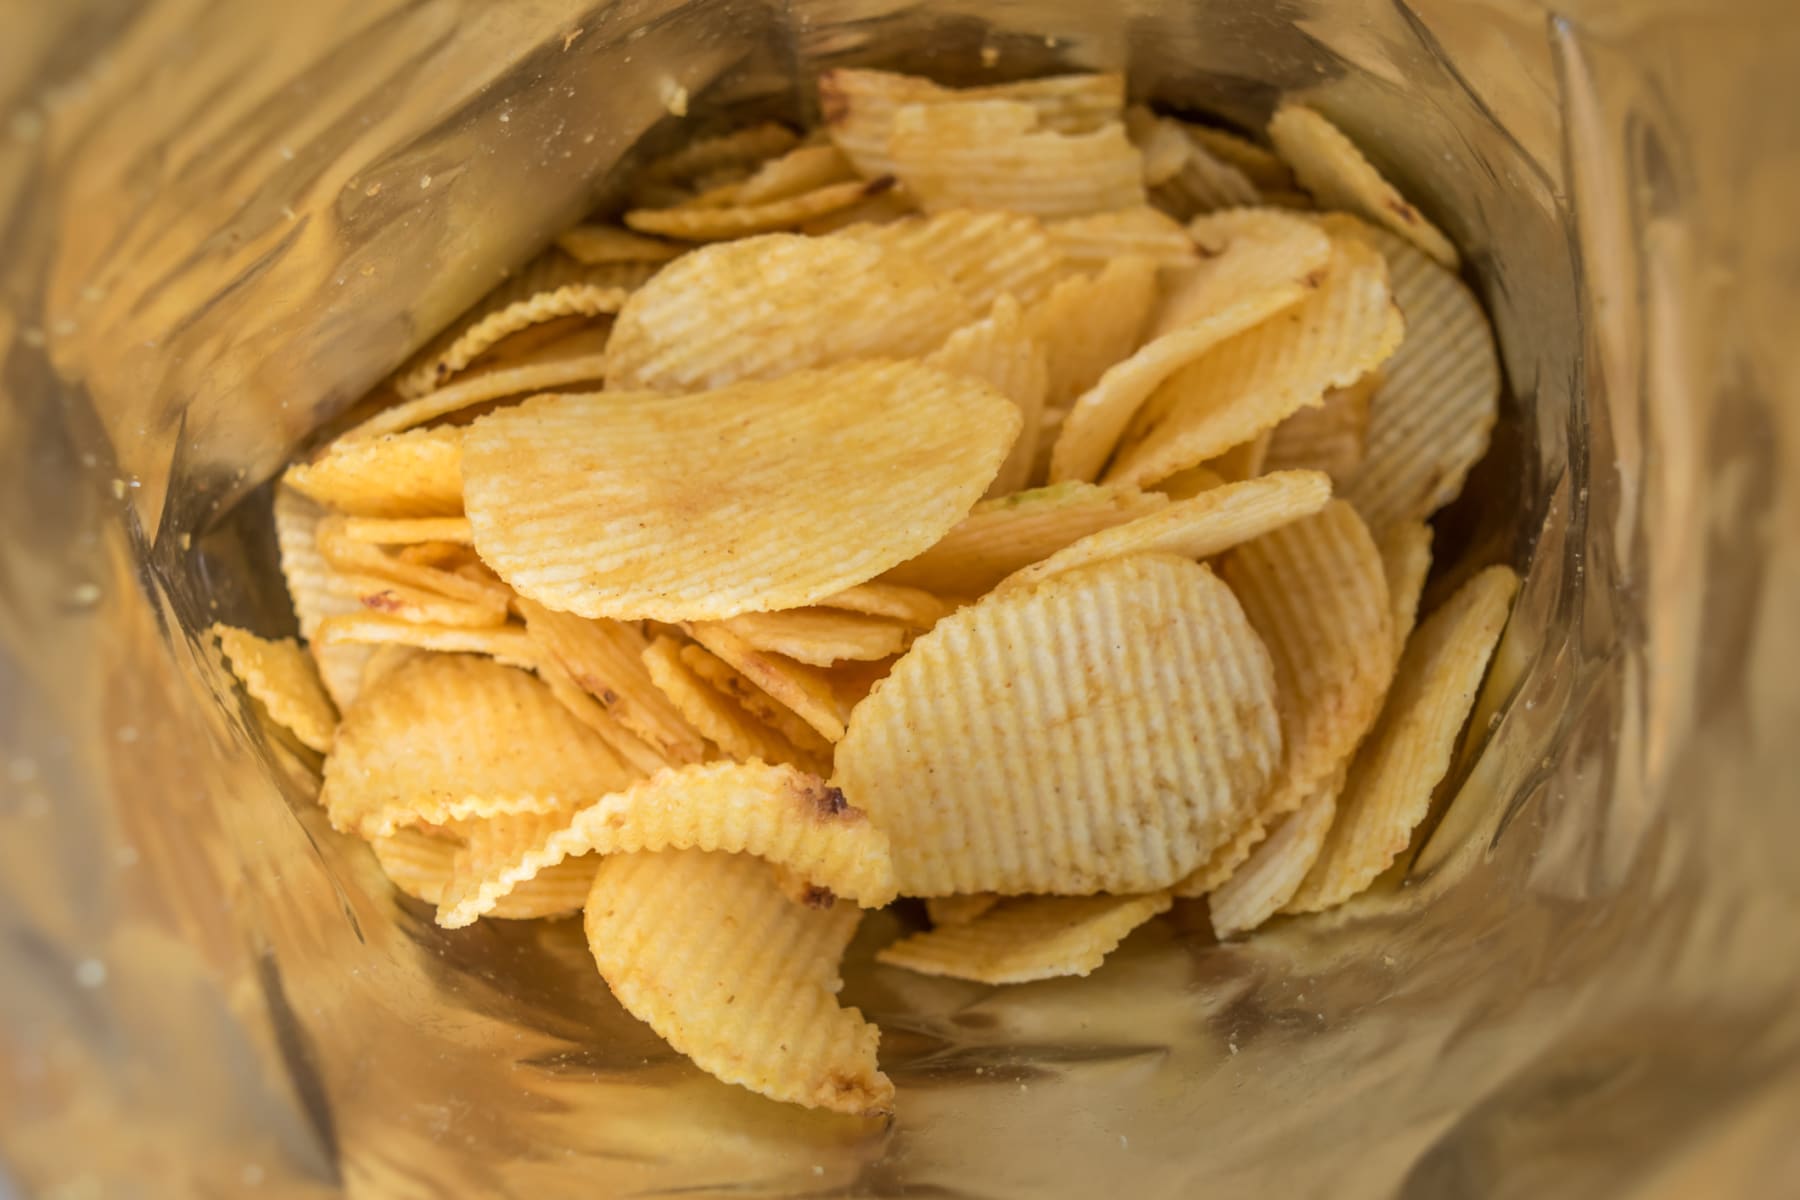 Chips in a Bag